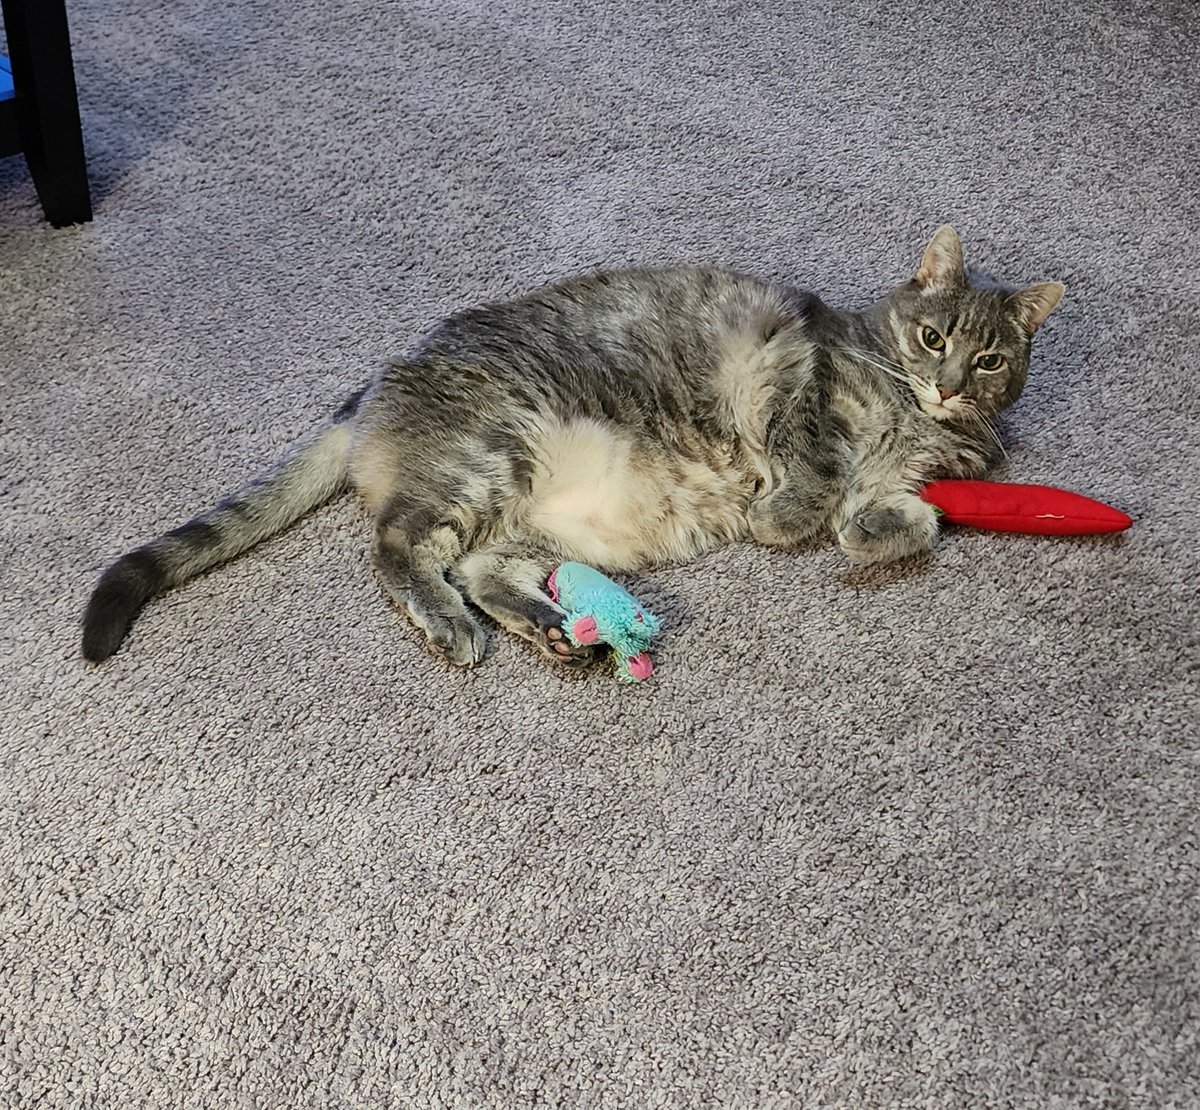 These are my two favorite toys. My cat nip mouse and my red pepper.
#Cat #Kitty #catlovers #catlover #CatToys